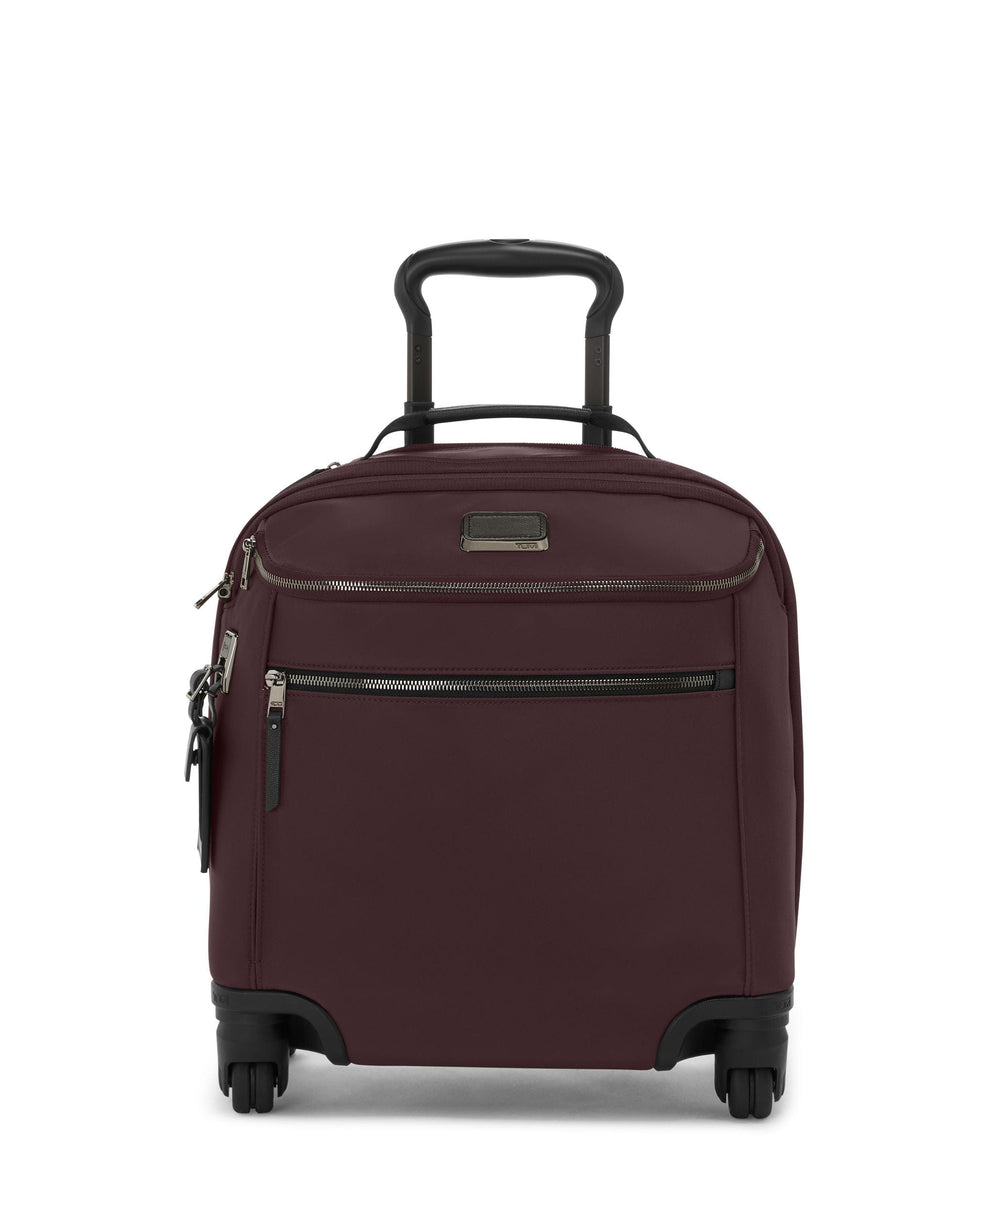 Oxford Compact Carry-On